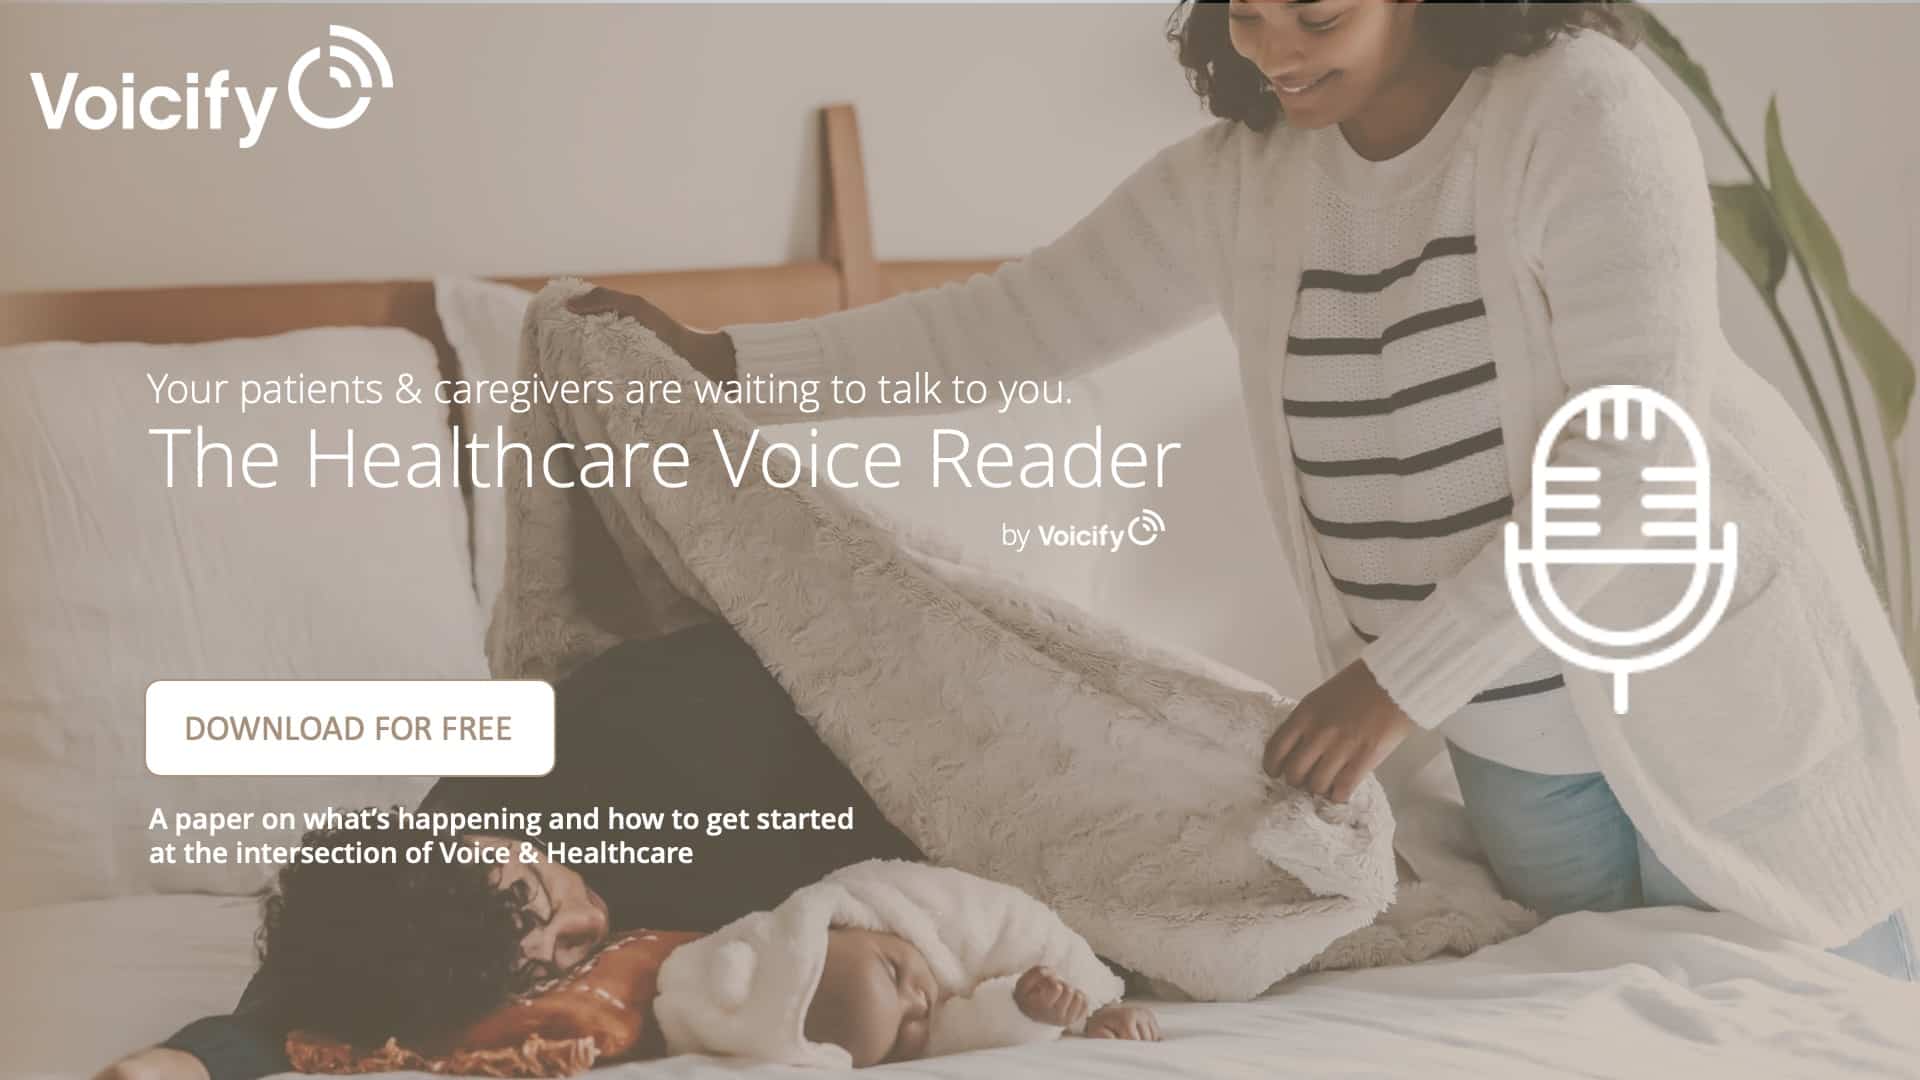 Healthcare Voice Apps with Voicify - The Reader